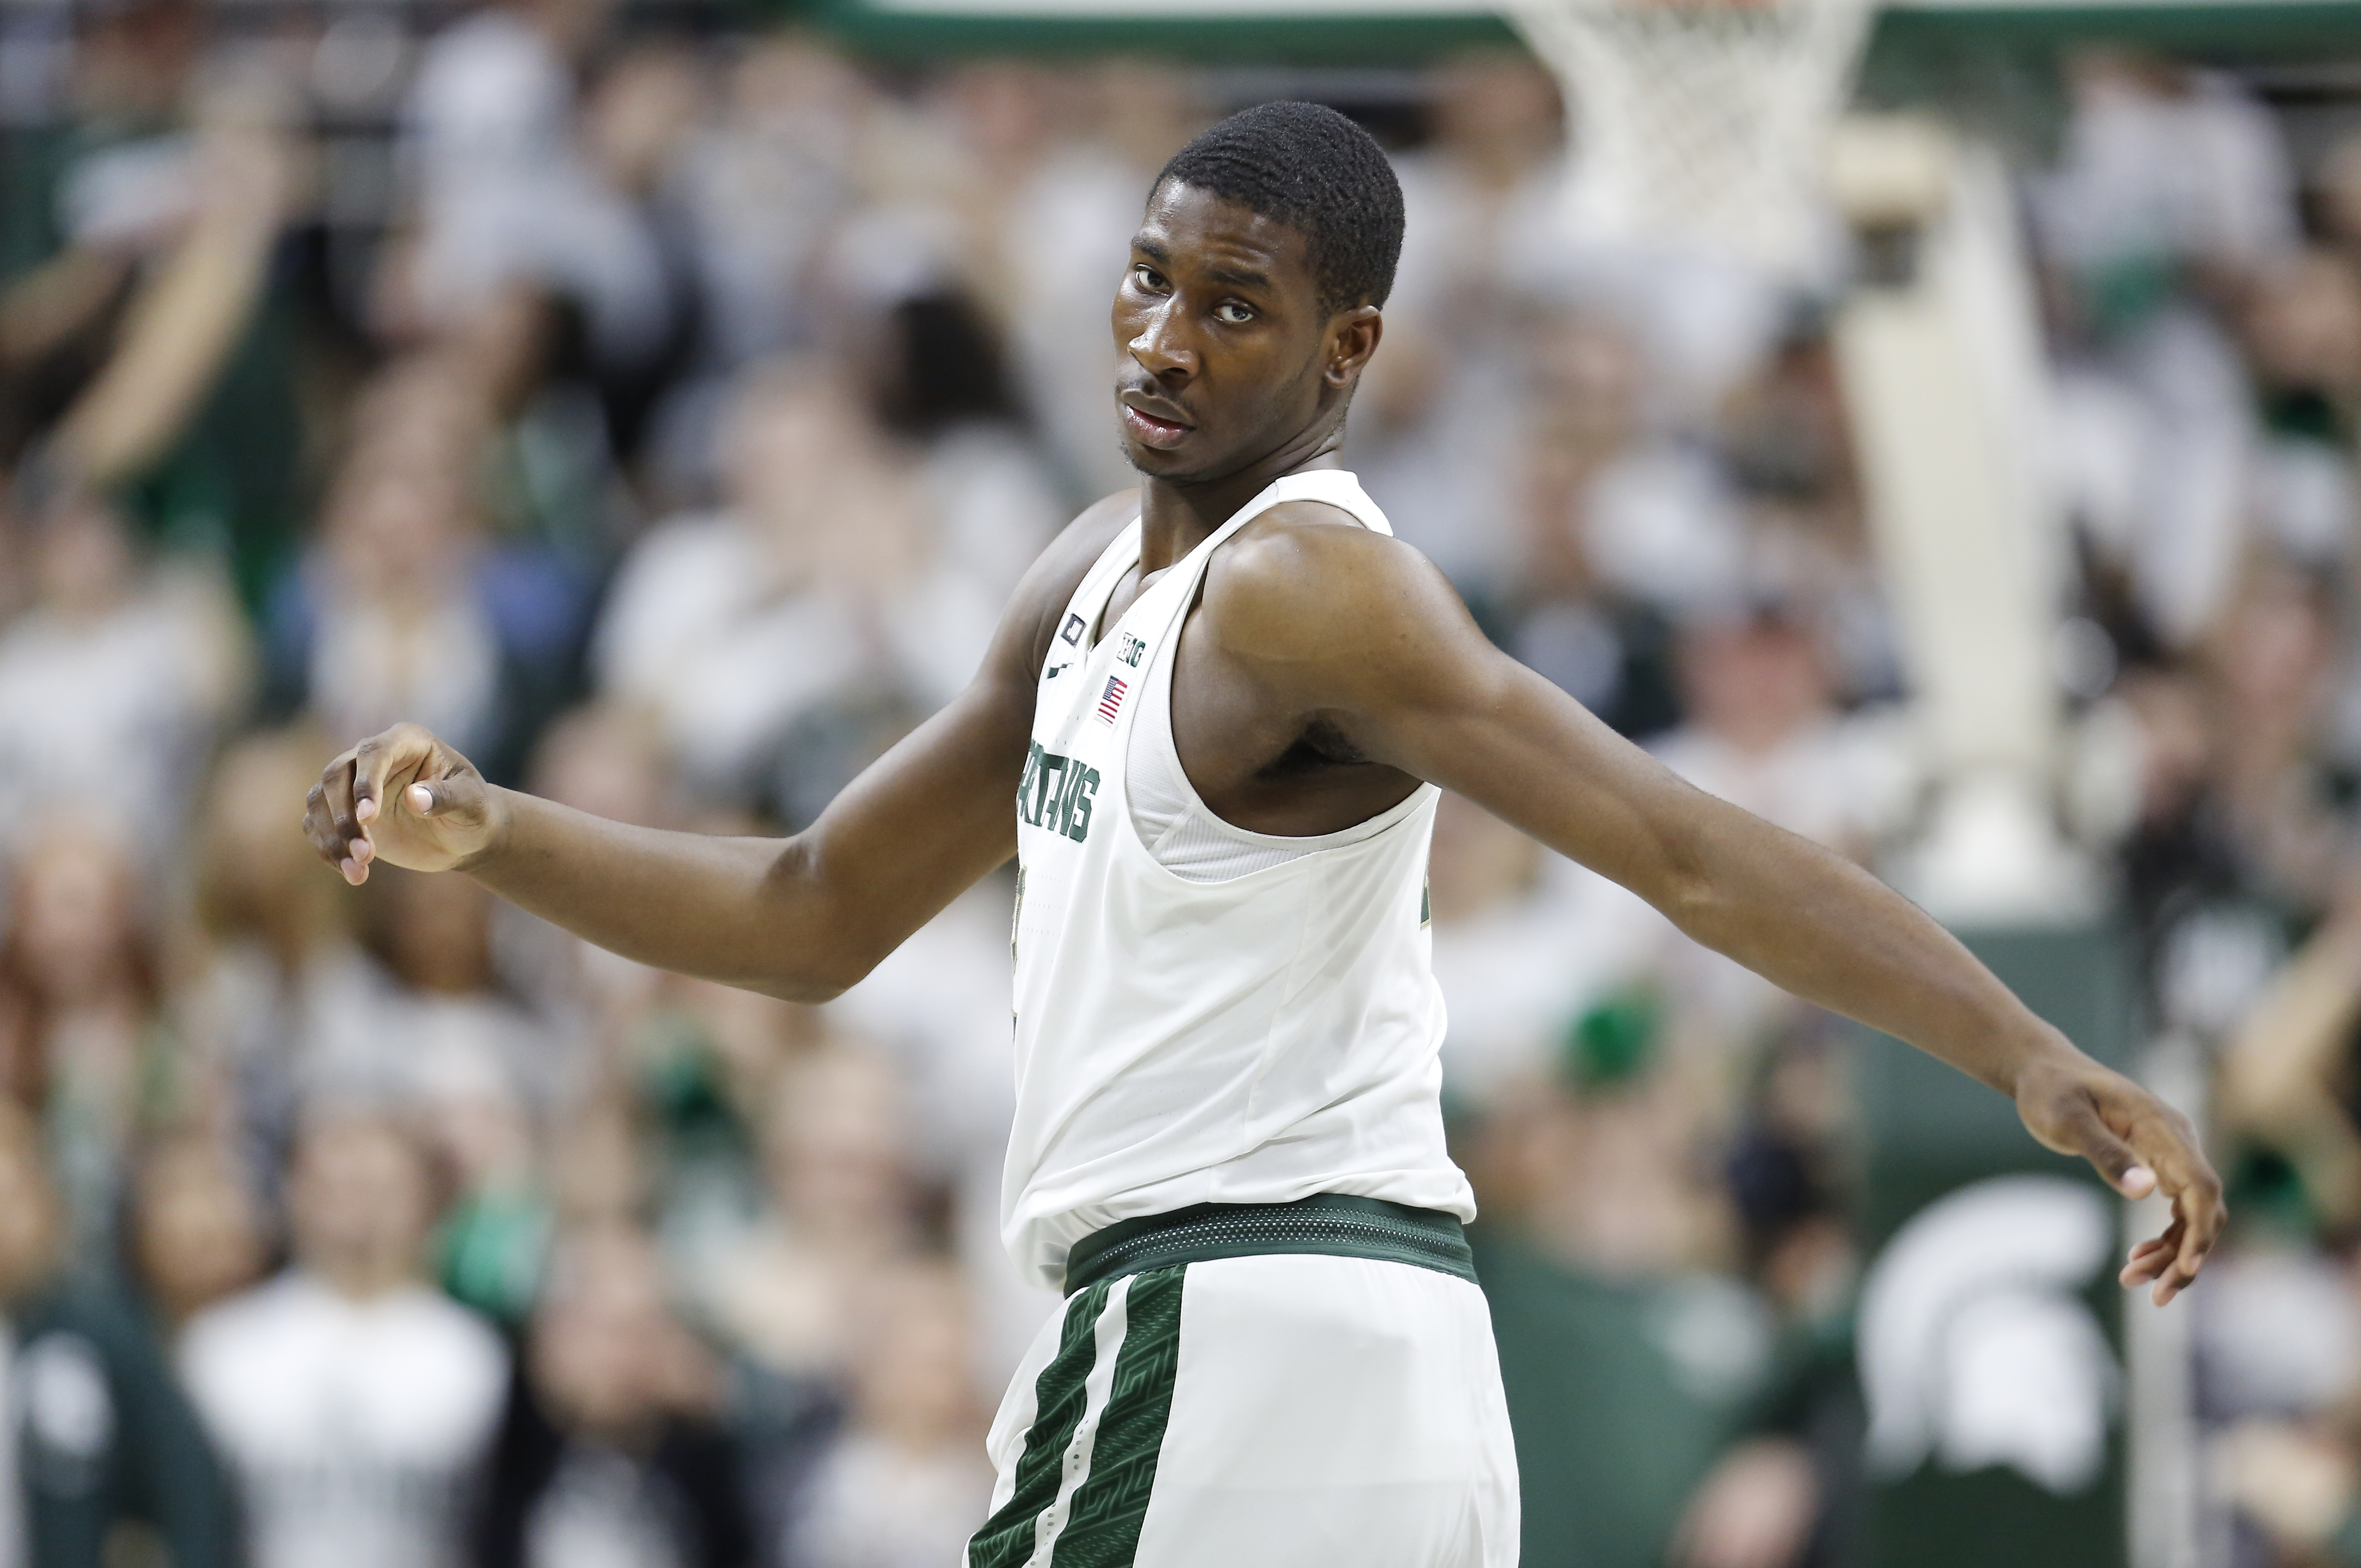 See Michigan State's Jaren Jackson on the cover of Sports